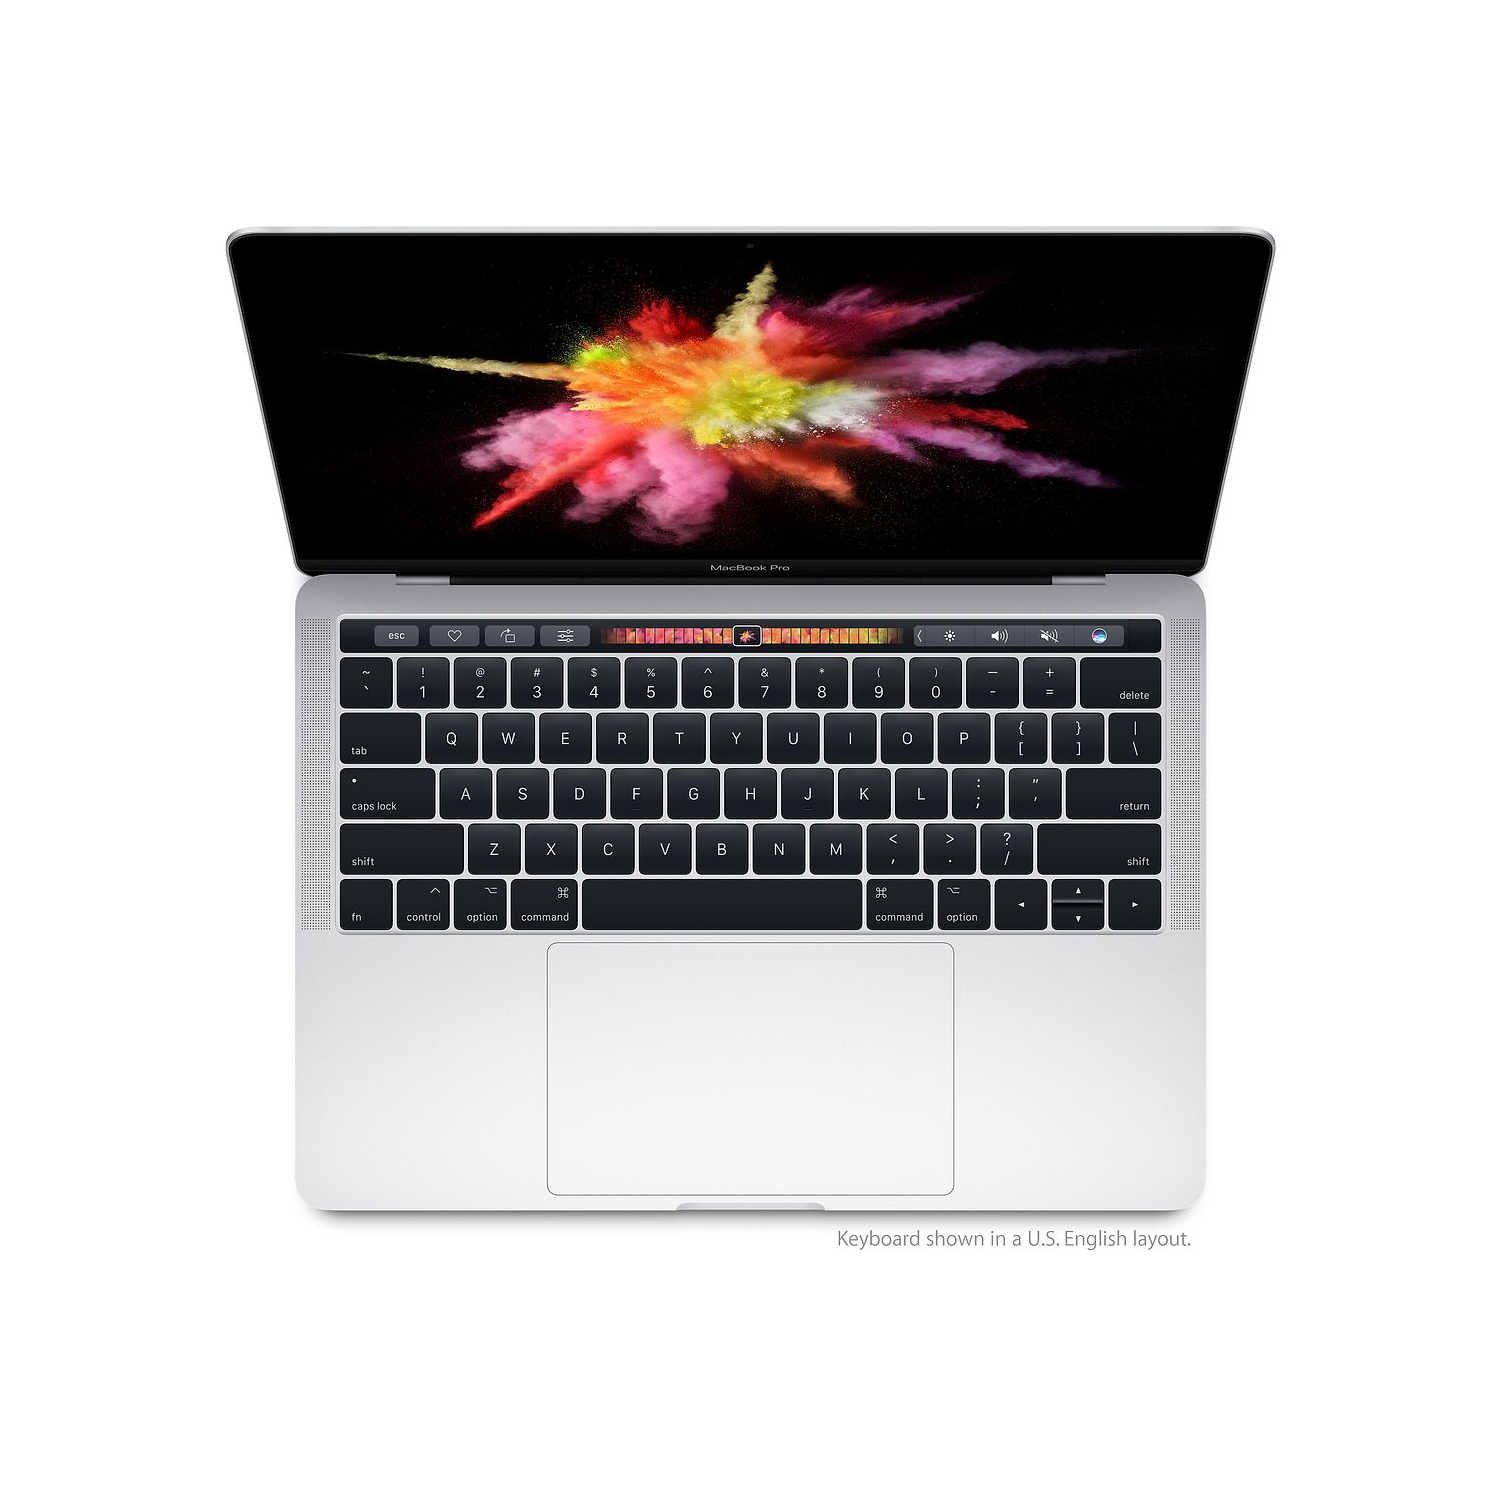 Refurbished (Excellent) - Apple MacBook Pro 13" Touch Bar - Intel Core i5-2.9GHz - 256GB SSD - 8GB RAM - Late 2016 (A1706) MLH12LL/A (Grade A)